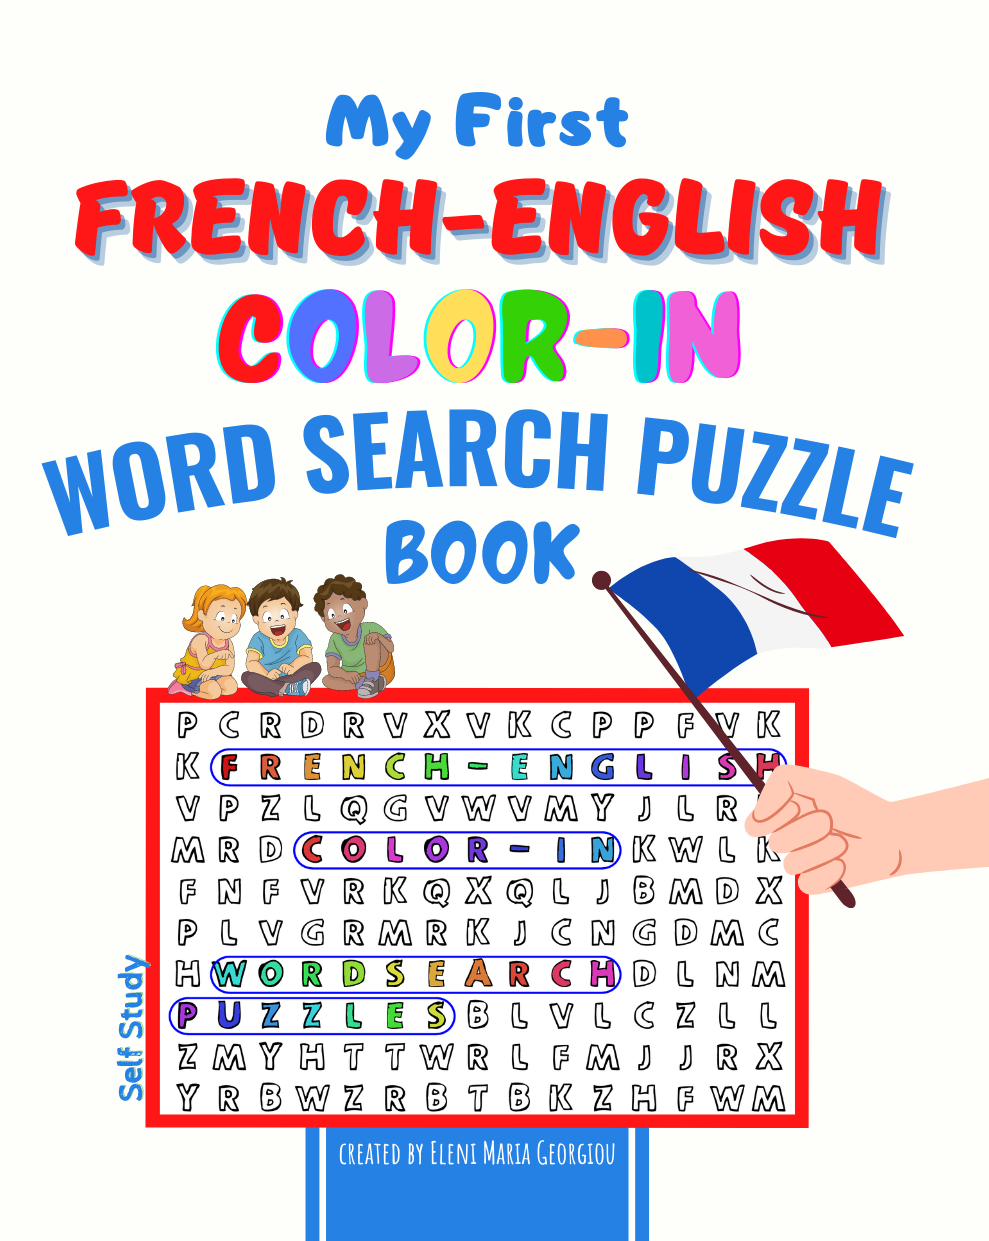 My First French-English Color-In Word Search Puzzle Book